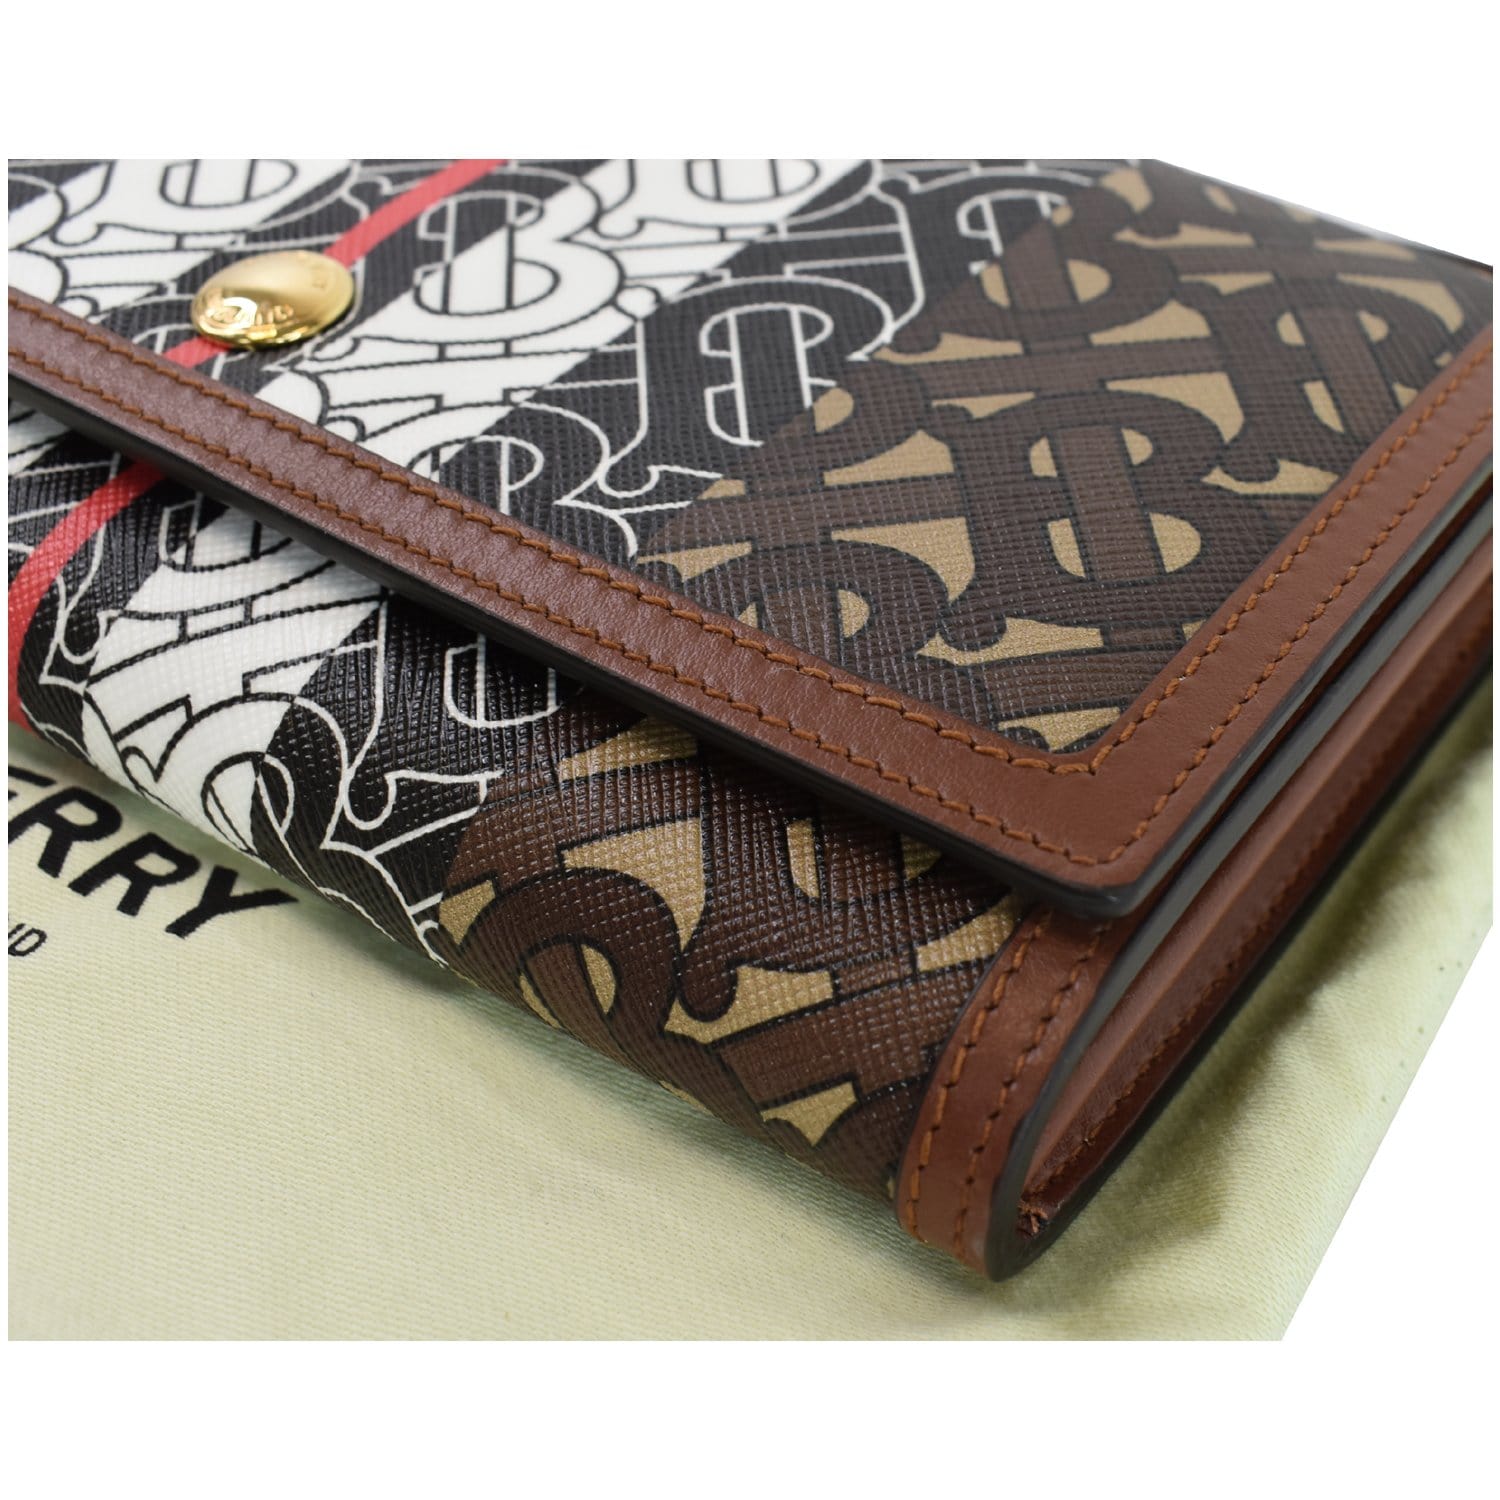 Burberry Brown/Black Monogram Coated Canvas TB Compact Wallet